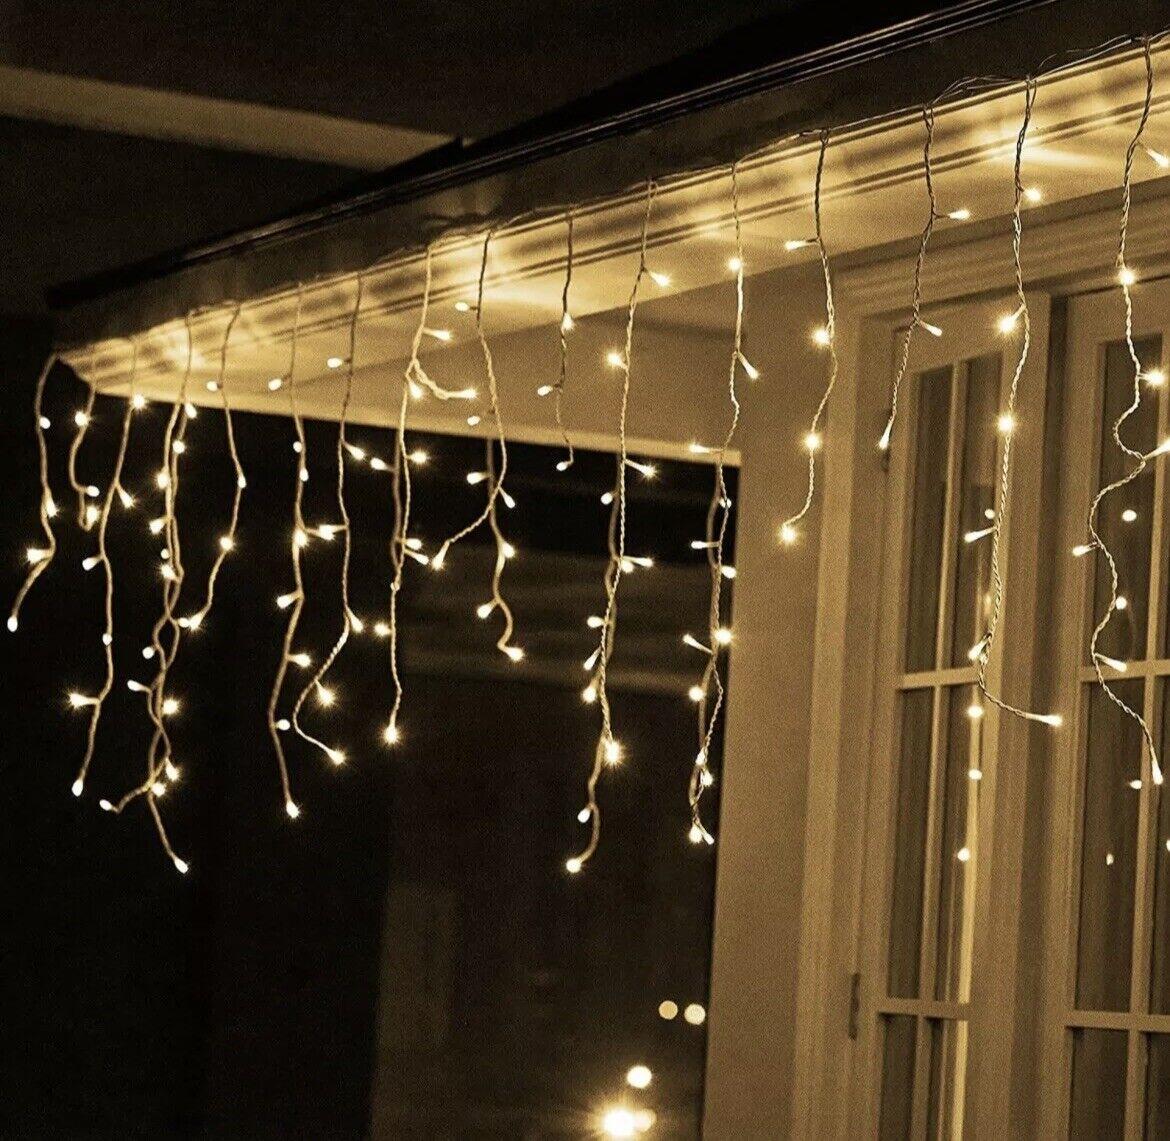 200 Christmas Warm White Led Icicle Lights by The Magic Toy Shop - The Magic Toy Shop